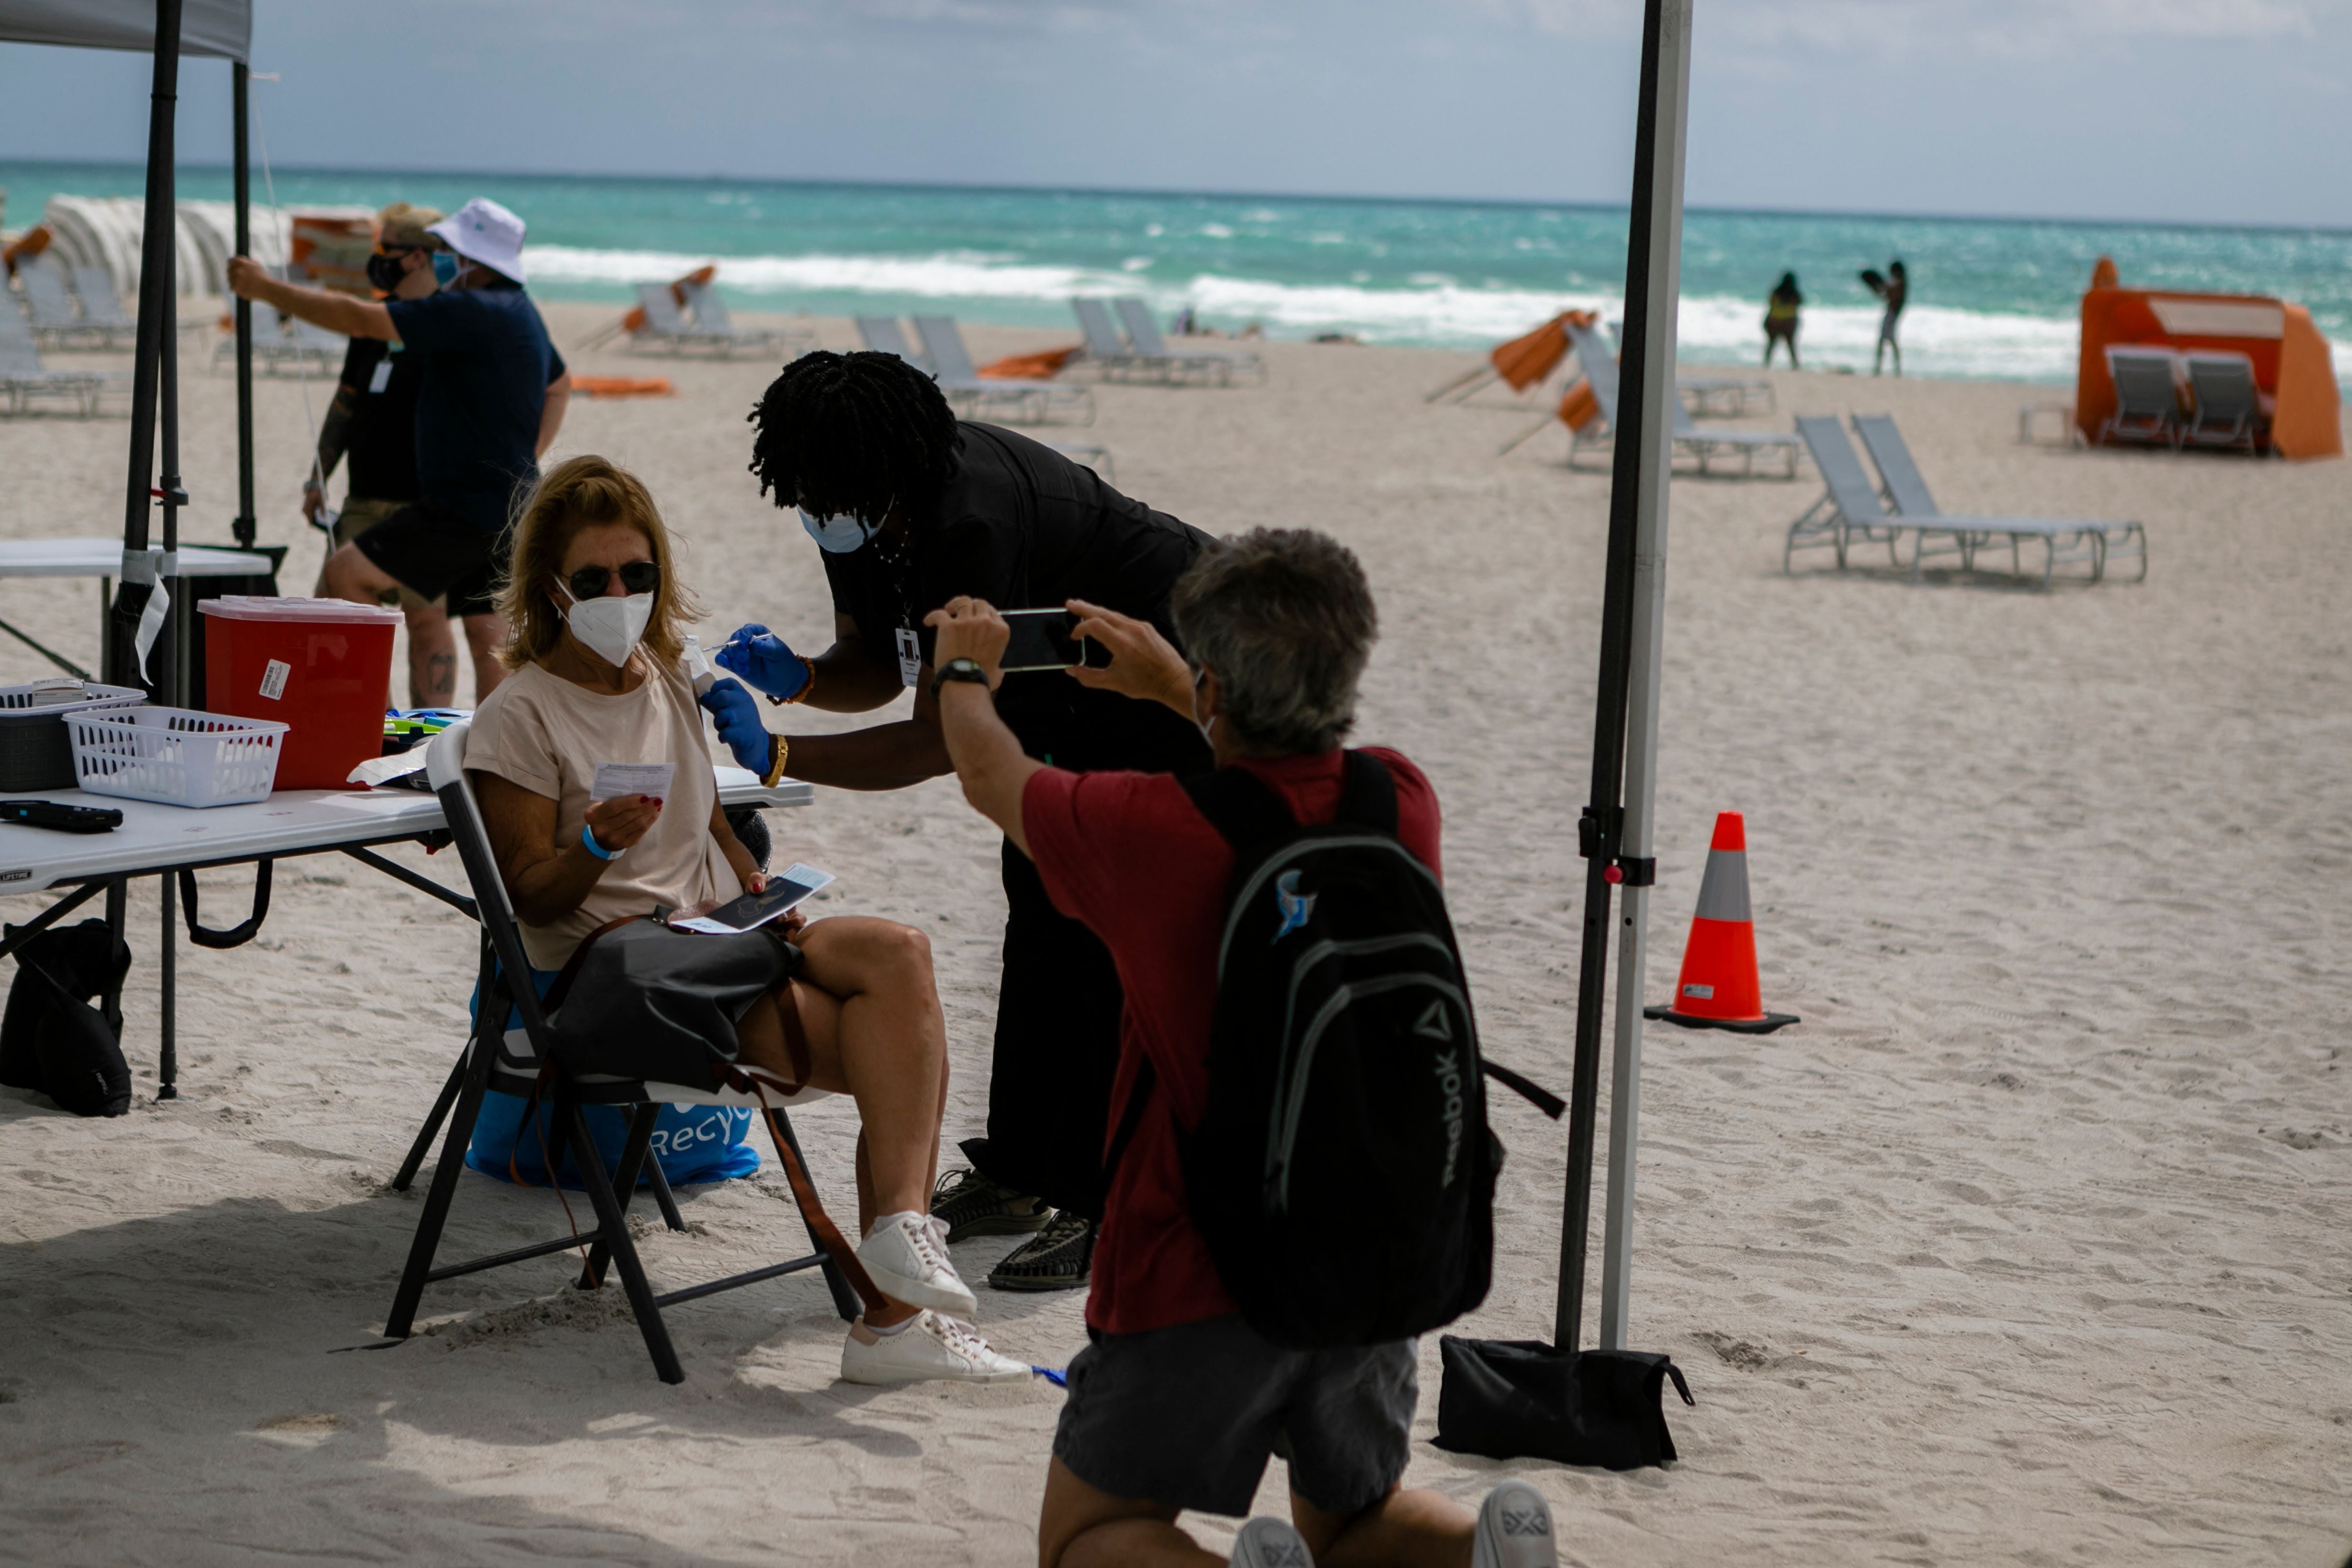 Representative: A woman gets a Johnson & Johnson Covid-19 vaccine at a pop-up vaccination center at the beach, in South Beach, Florida, on 9 May 2021.